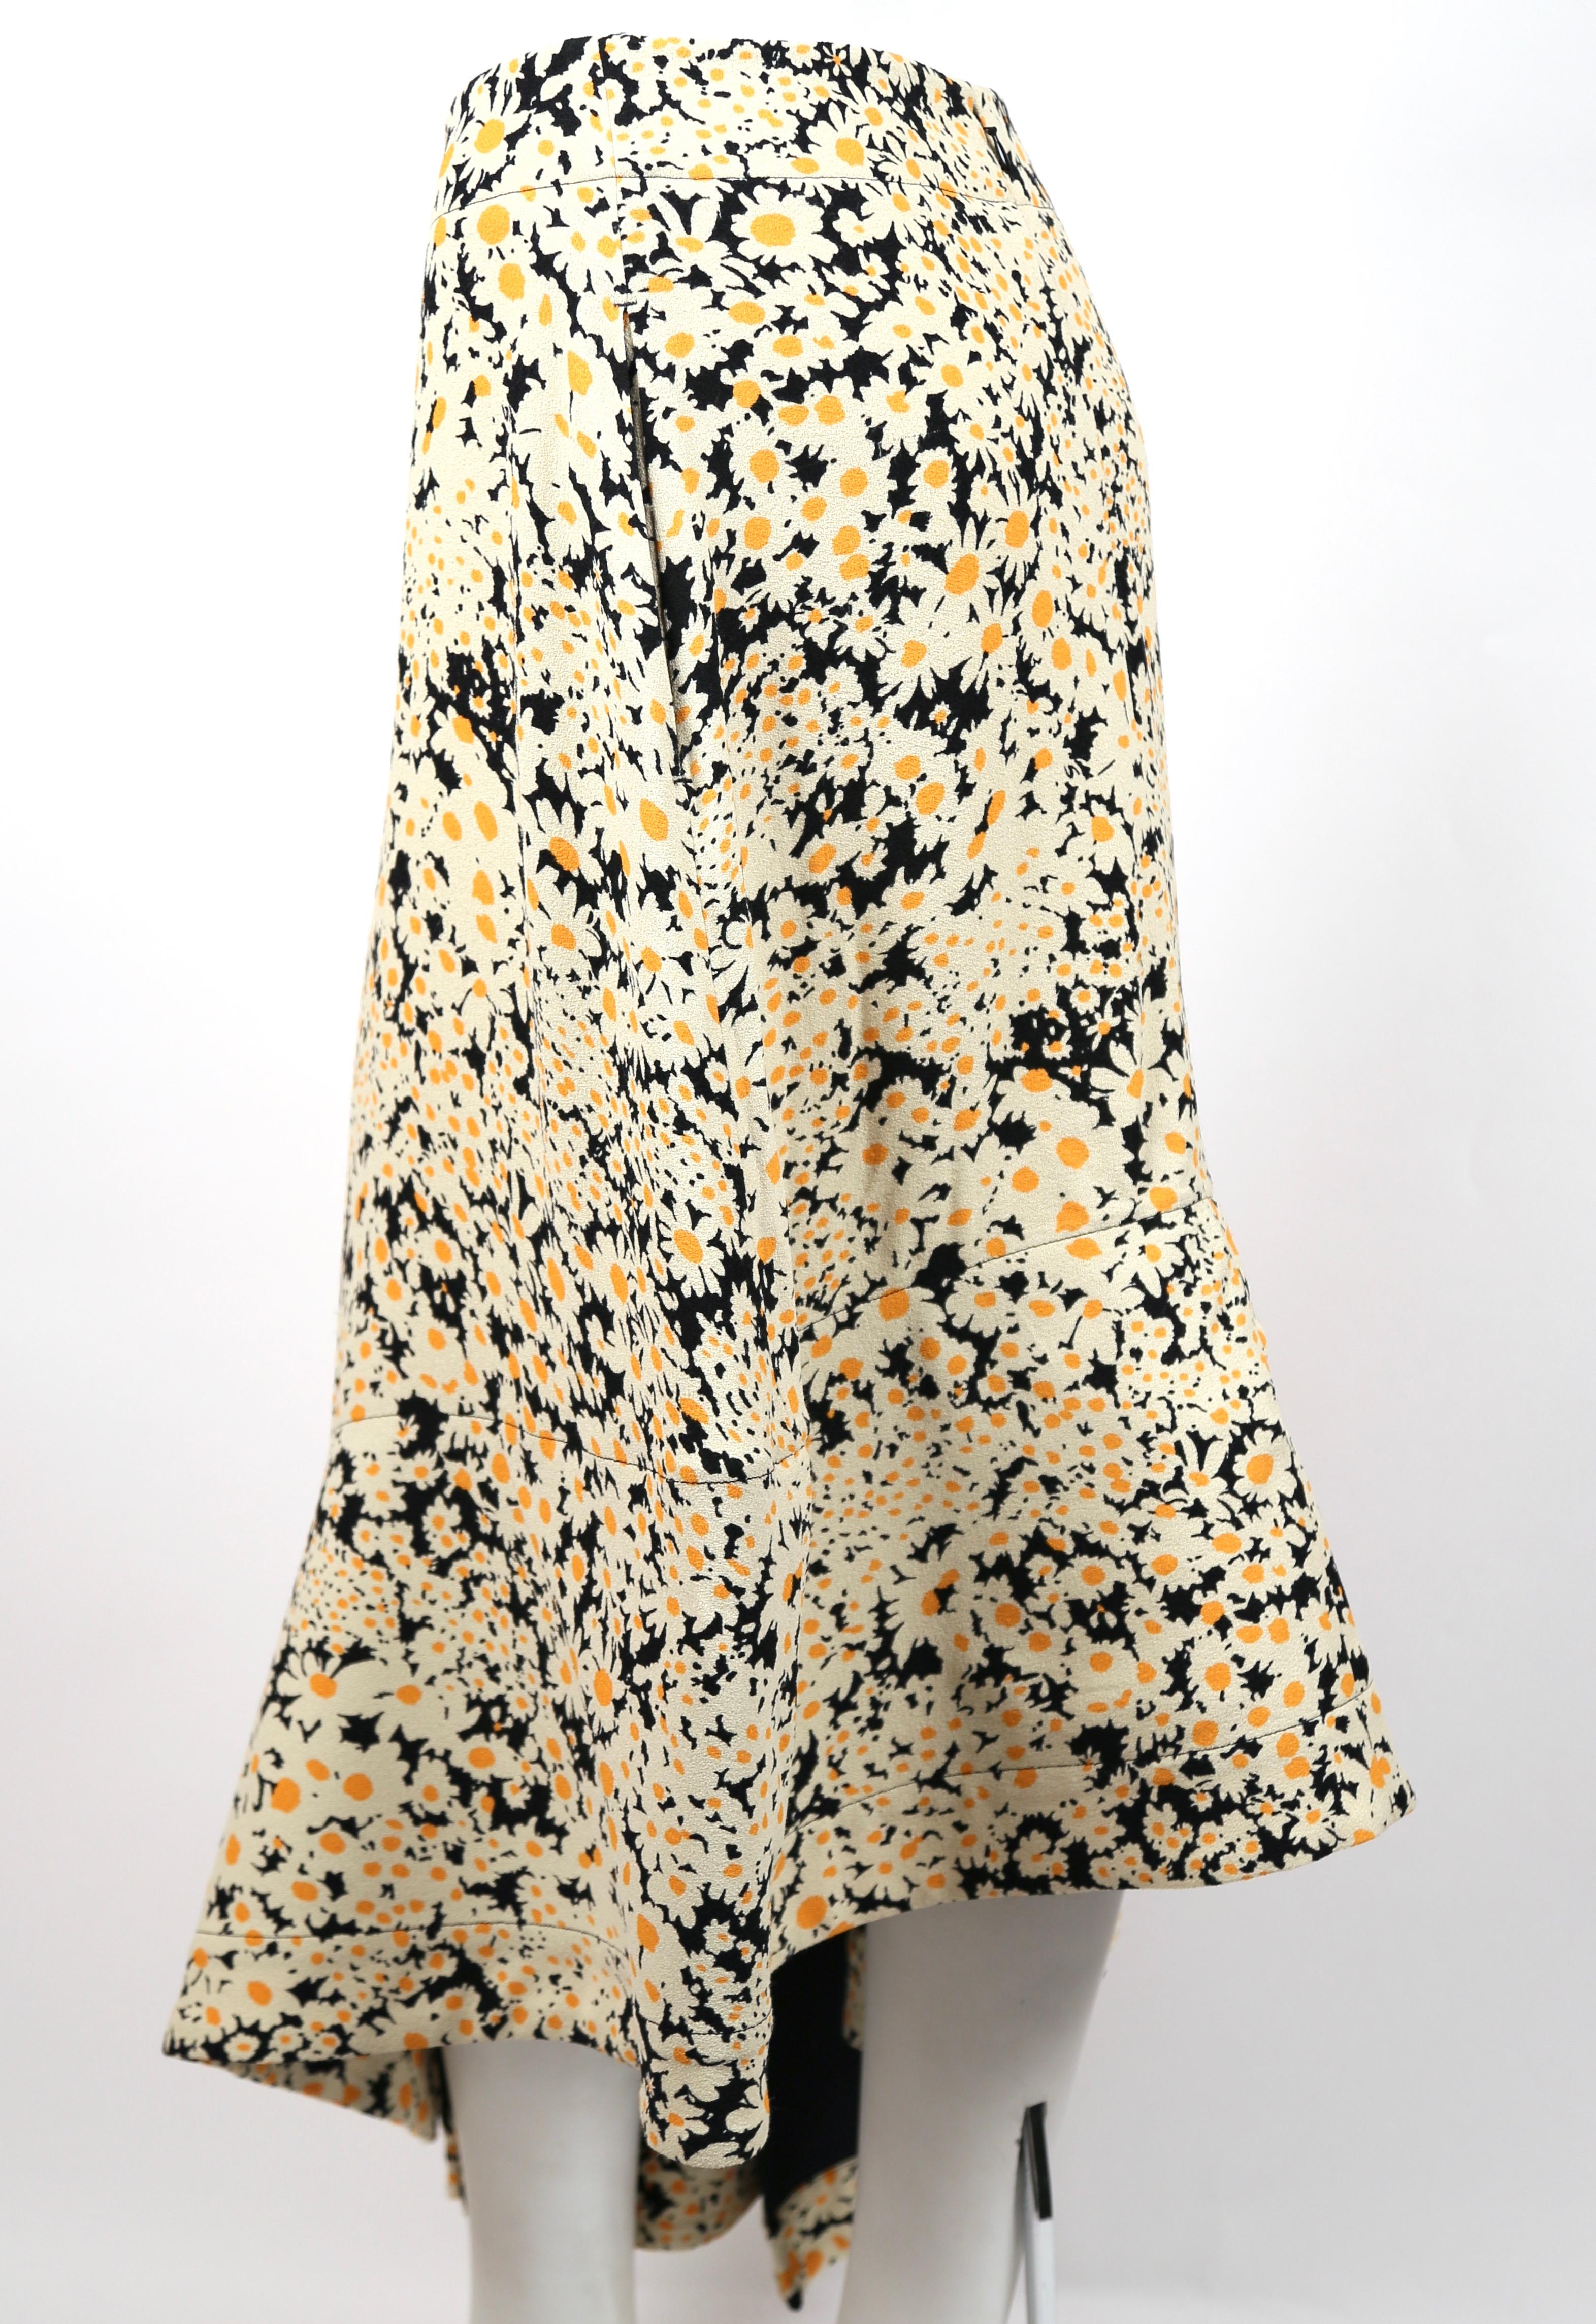 Floral printed crepe skirt with asymmetrical hem and flounce designed by Phoebe Philo for Celine exactly as seen on the spring 2015 runway. French size 38. Approximate measurements: waistband 28